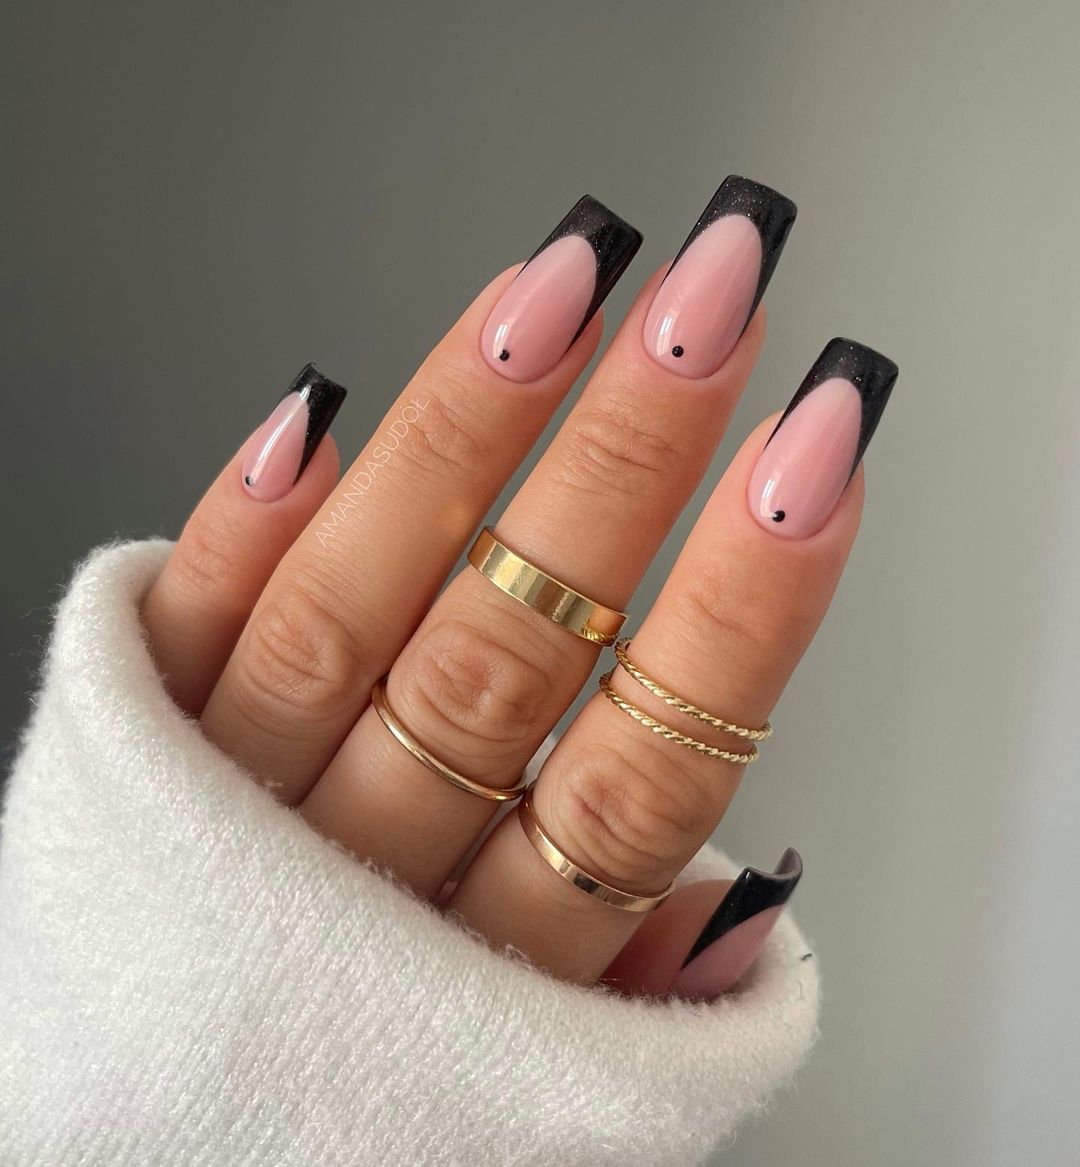 Long Square Black French Tip Nails